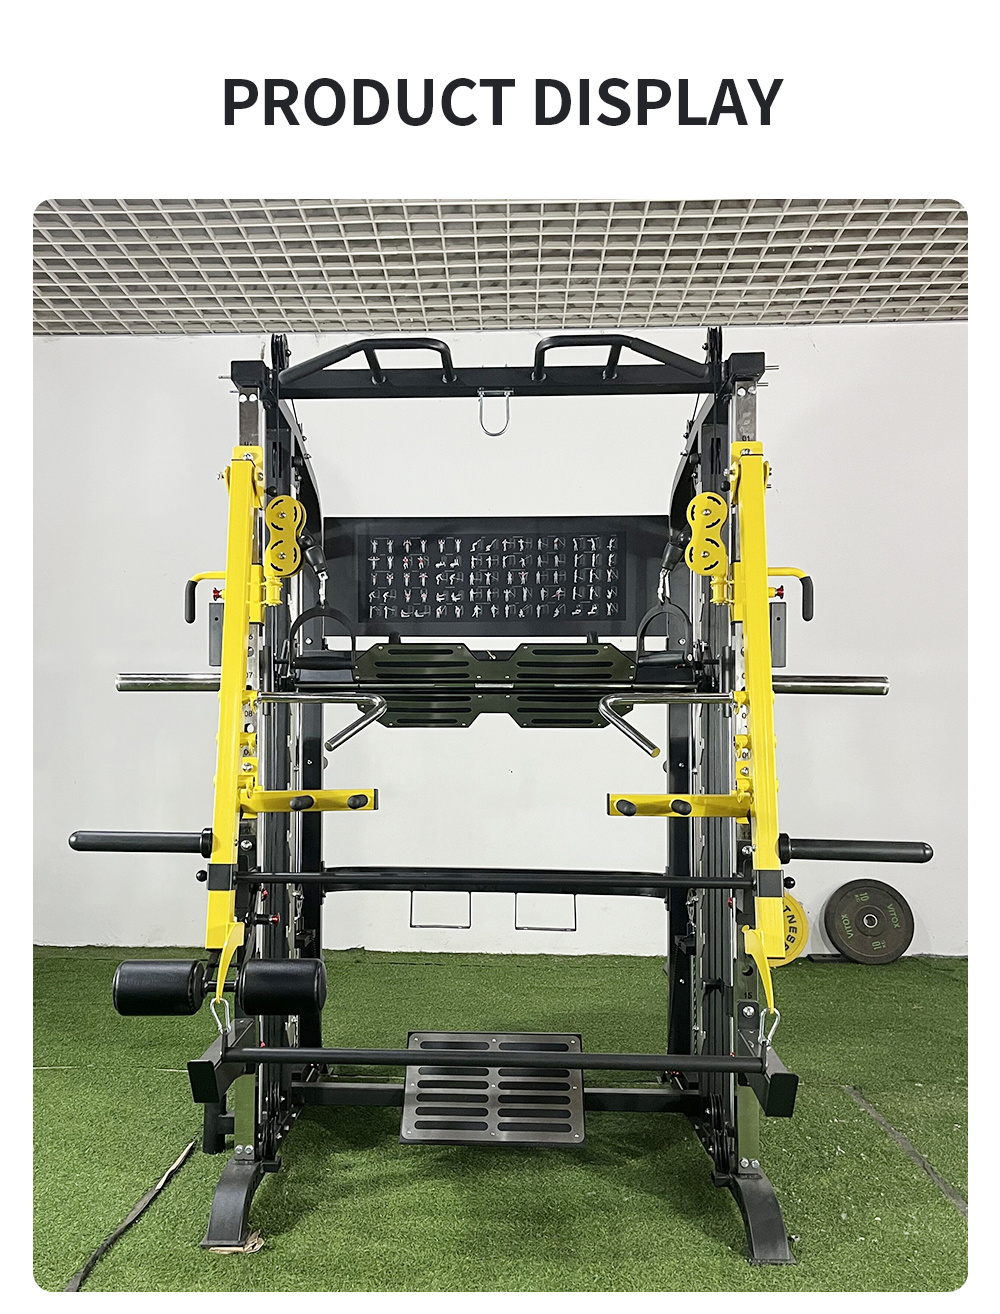 Gym Full Equipment Multifunctional Equipment Training Cable Machine Squat Power Rack Smith Life Fitness Smith Cage Machine